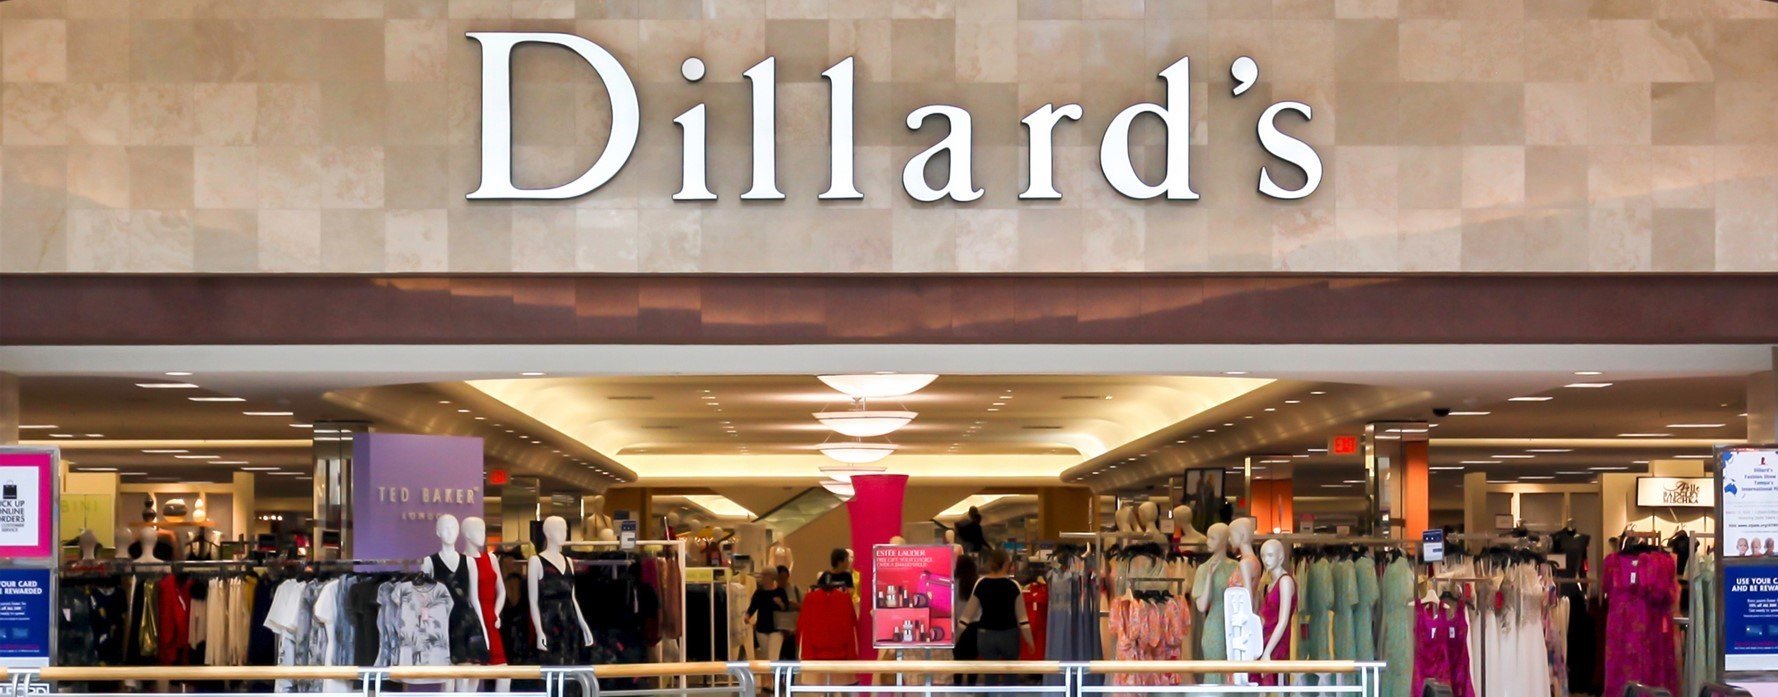 This is the entryway to Dillard's Inc.'s well-organized luxury American department store, which displays a wide range of items.